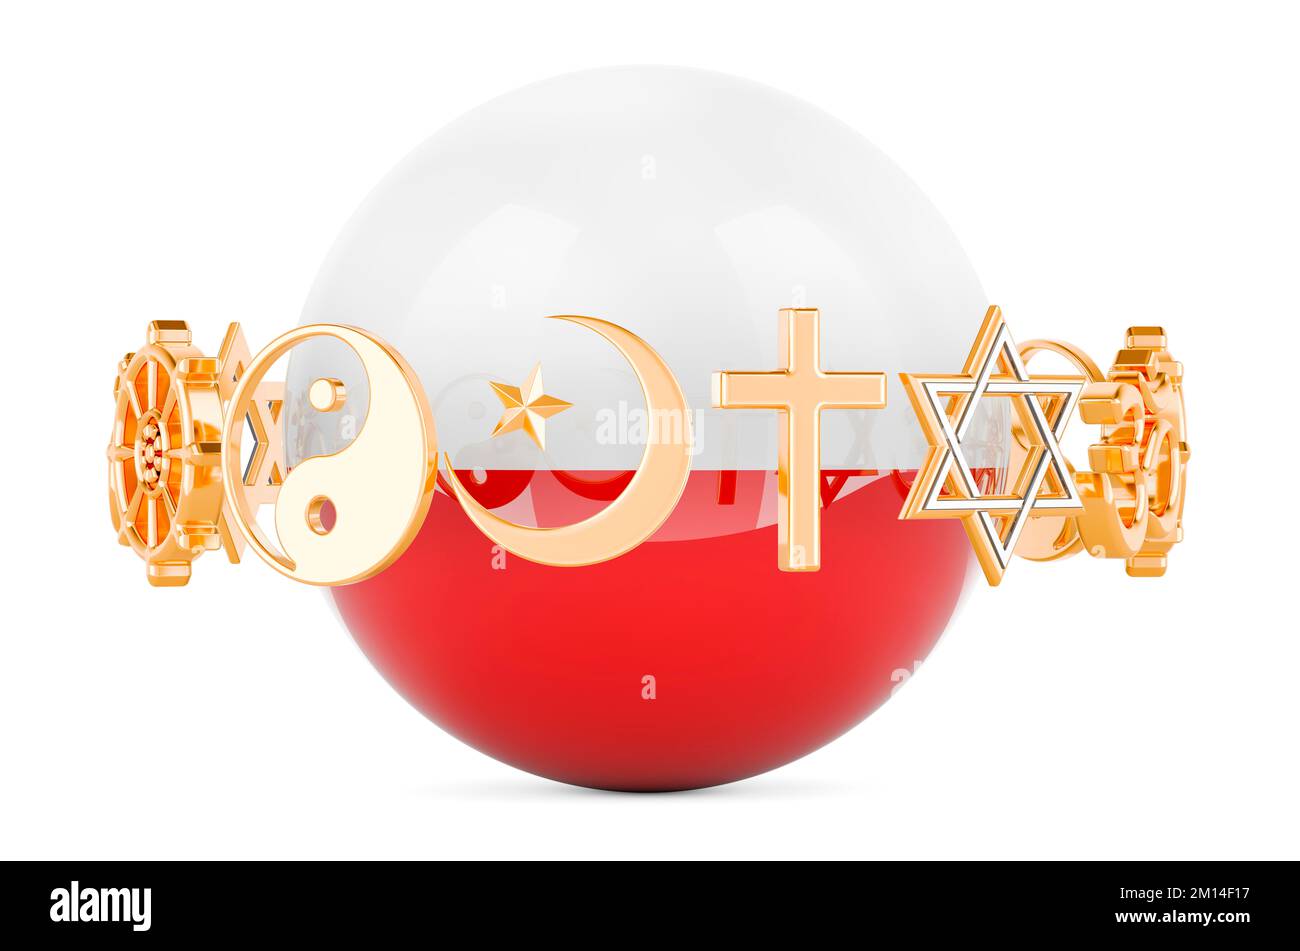 Polish flag painted on sphere with religions symbols around, 3D rendering isolated on white background Stock Photo